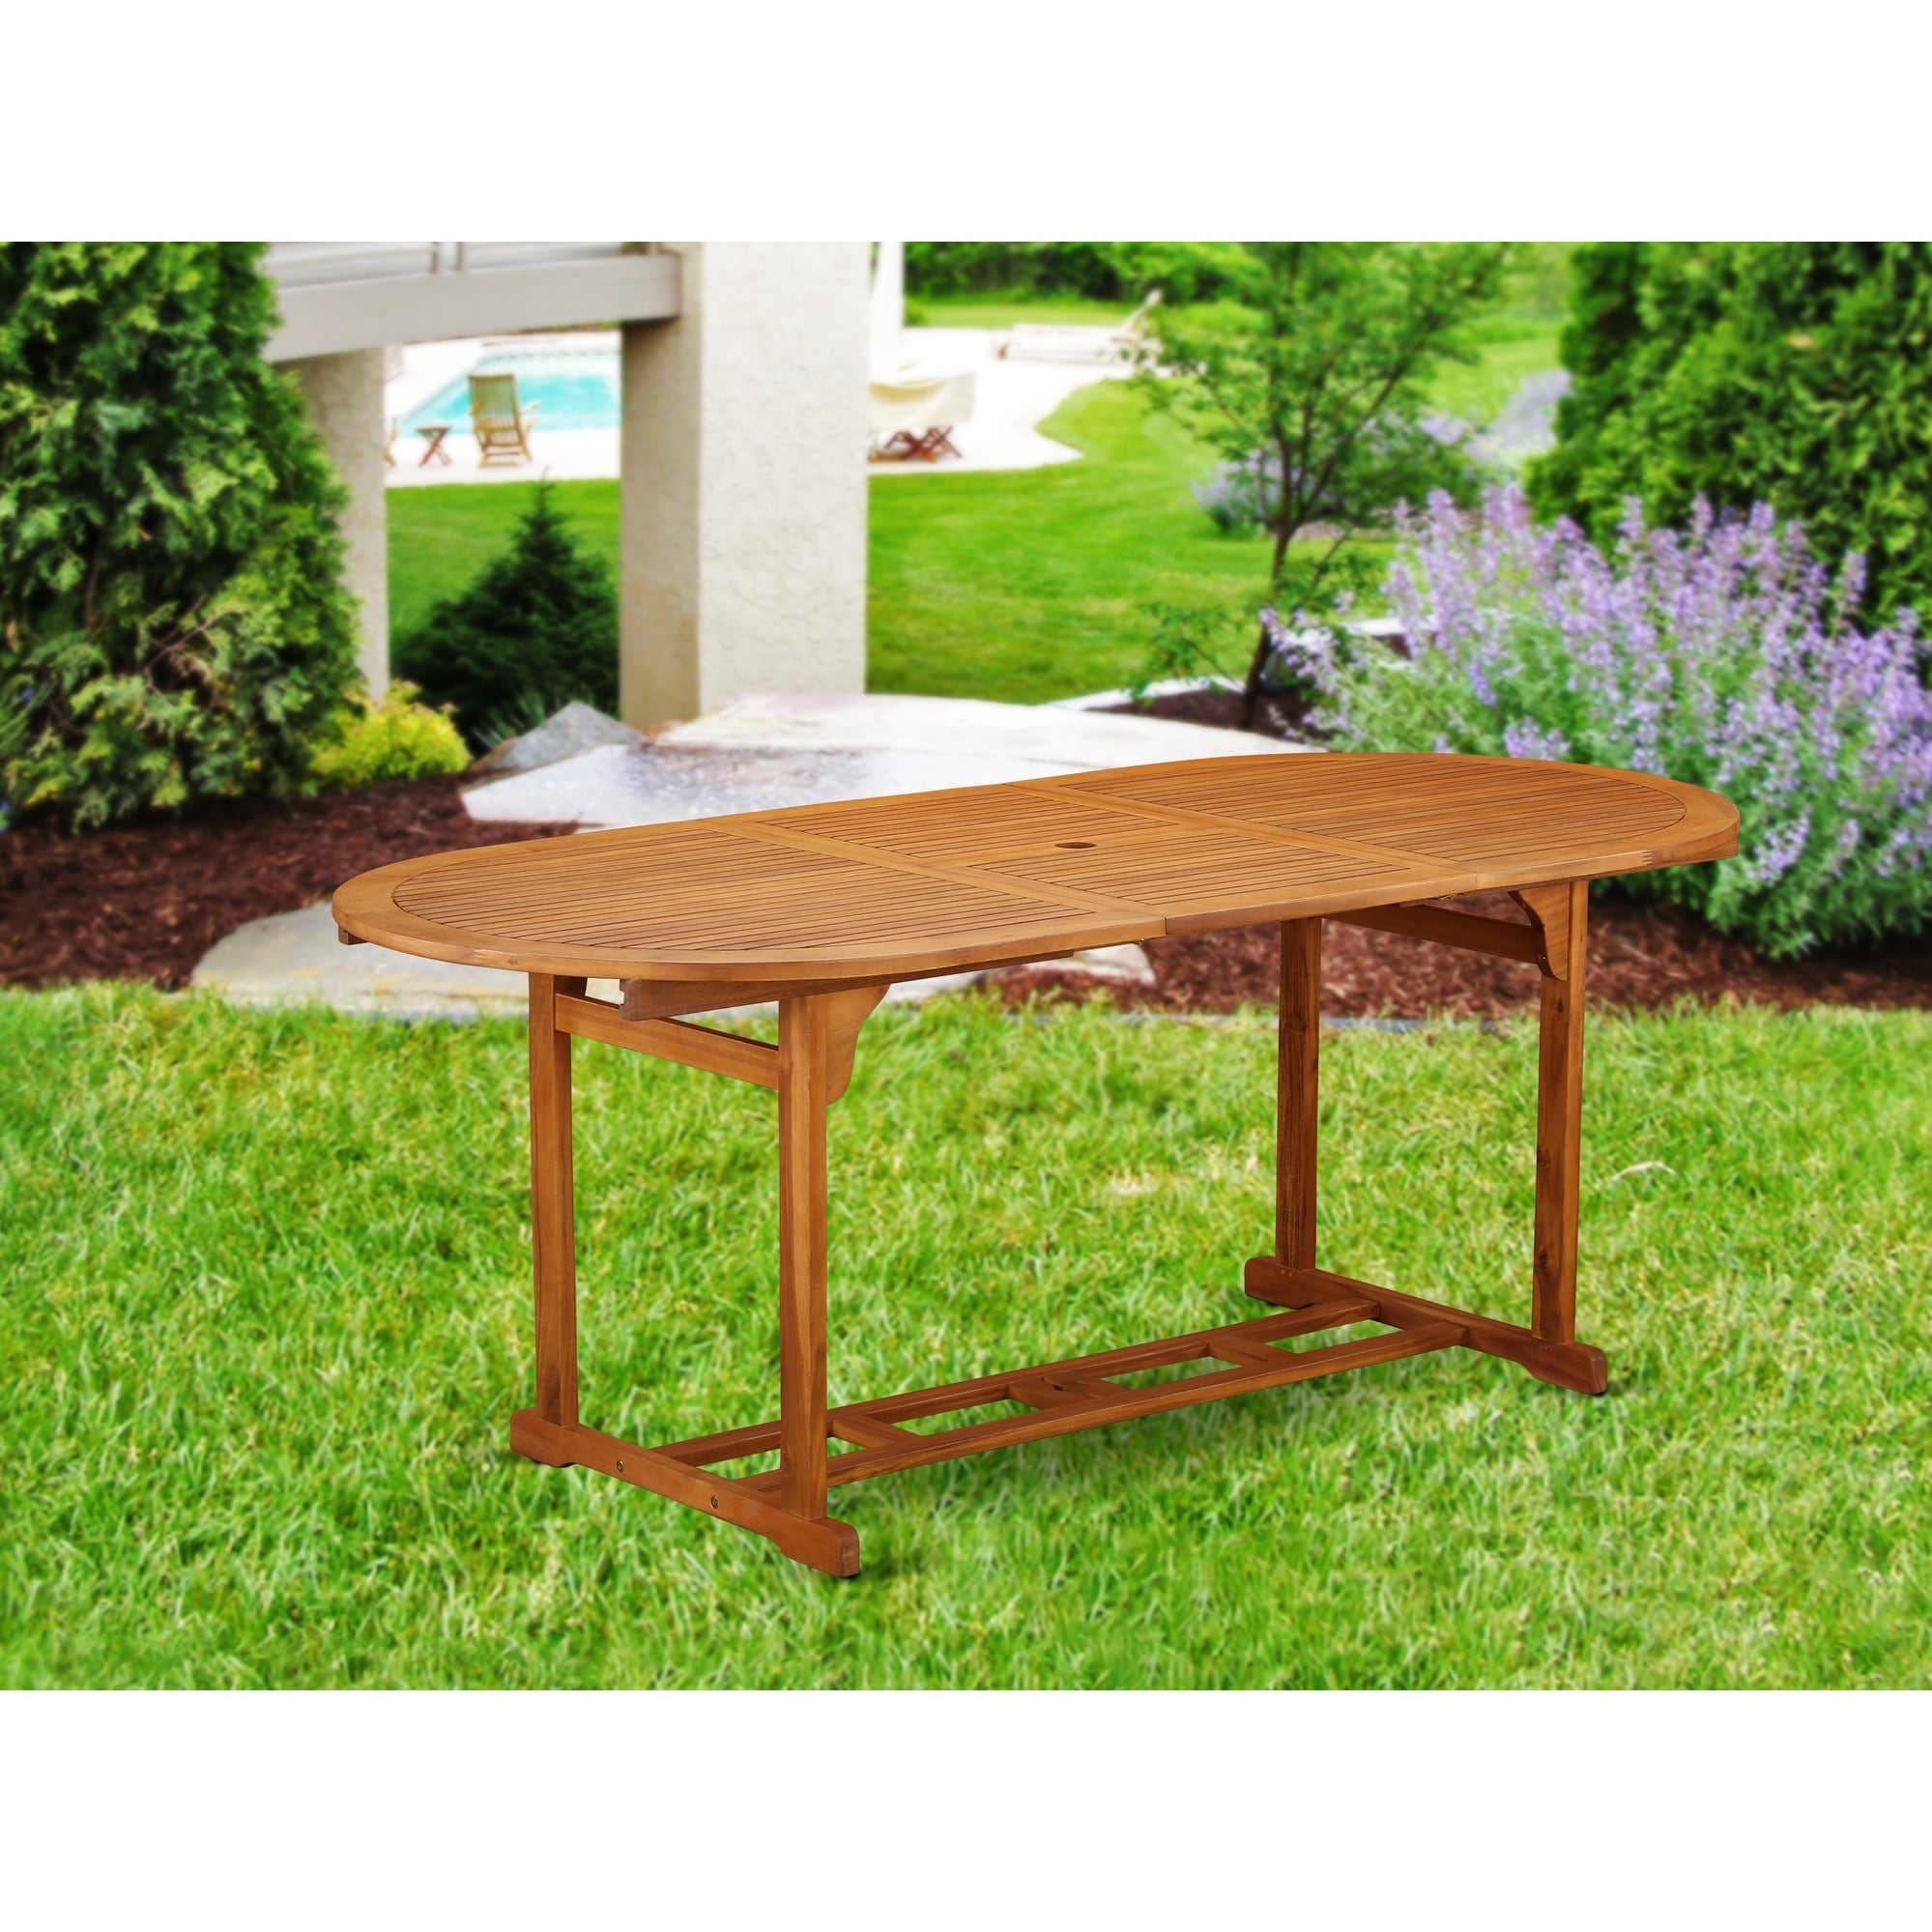 East West Furniture Oval Terrace Acacia Solid Wood Dining Table Natural Oil Finish